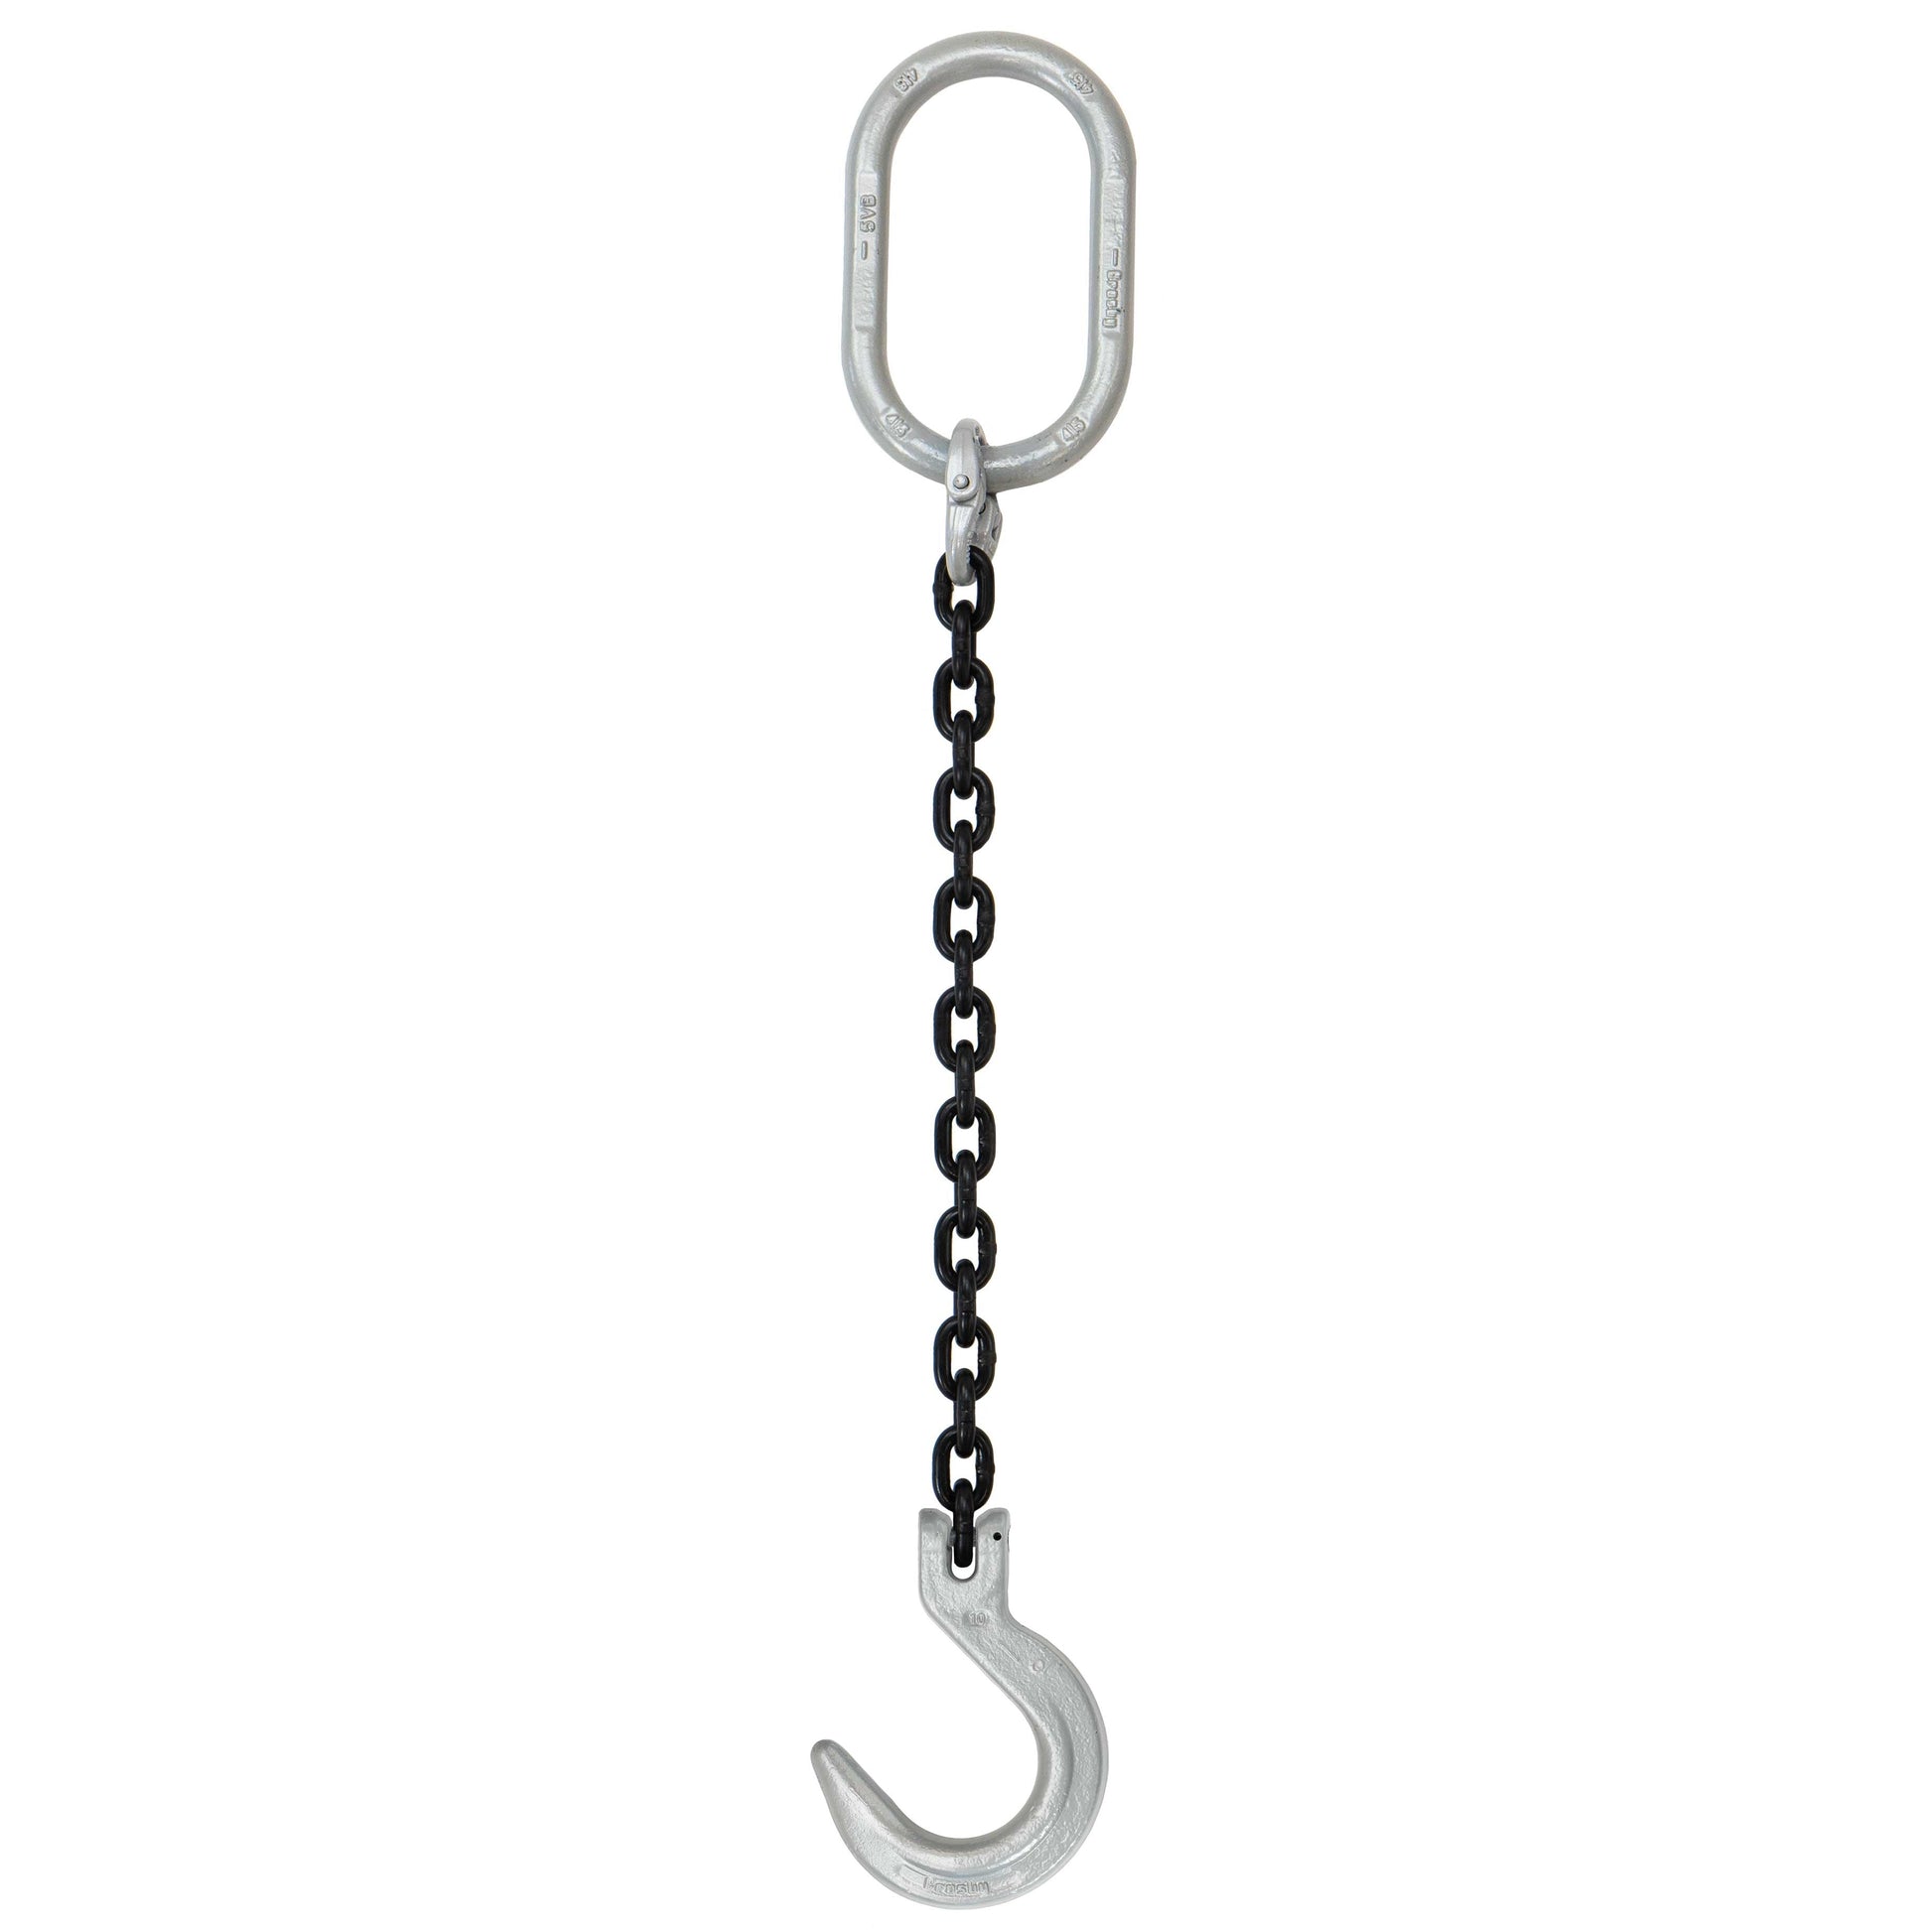 12 inch x 16 foot Domestic Single Leg Chain Sling w Crosby Foundry Hook Grade 100 image 1 of 2